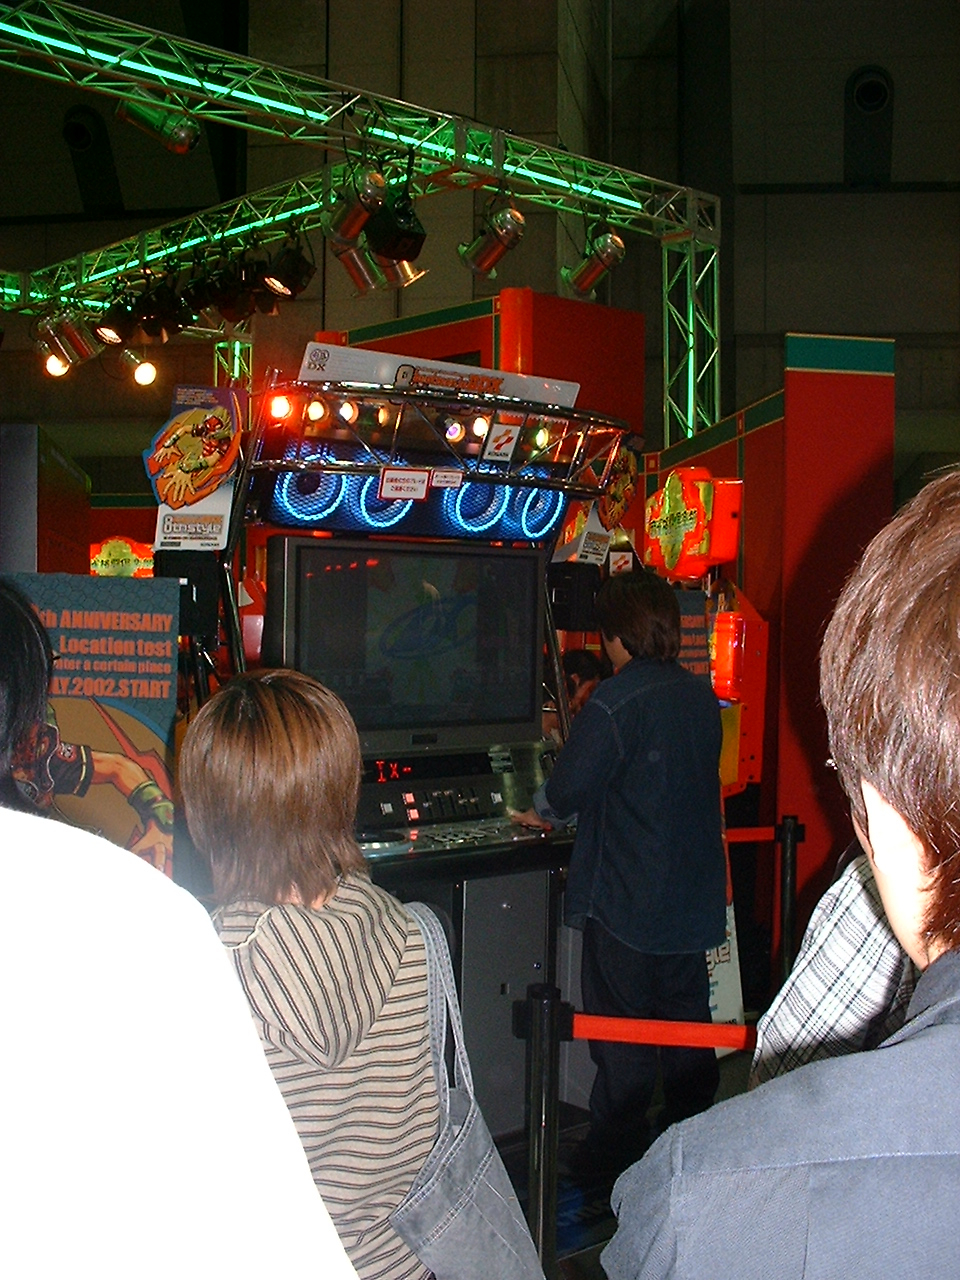 a small crowd watches someone play a rhythm game